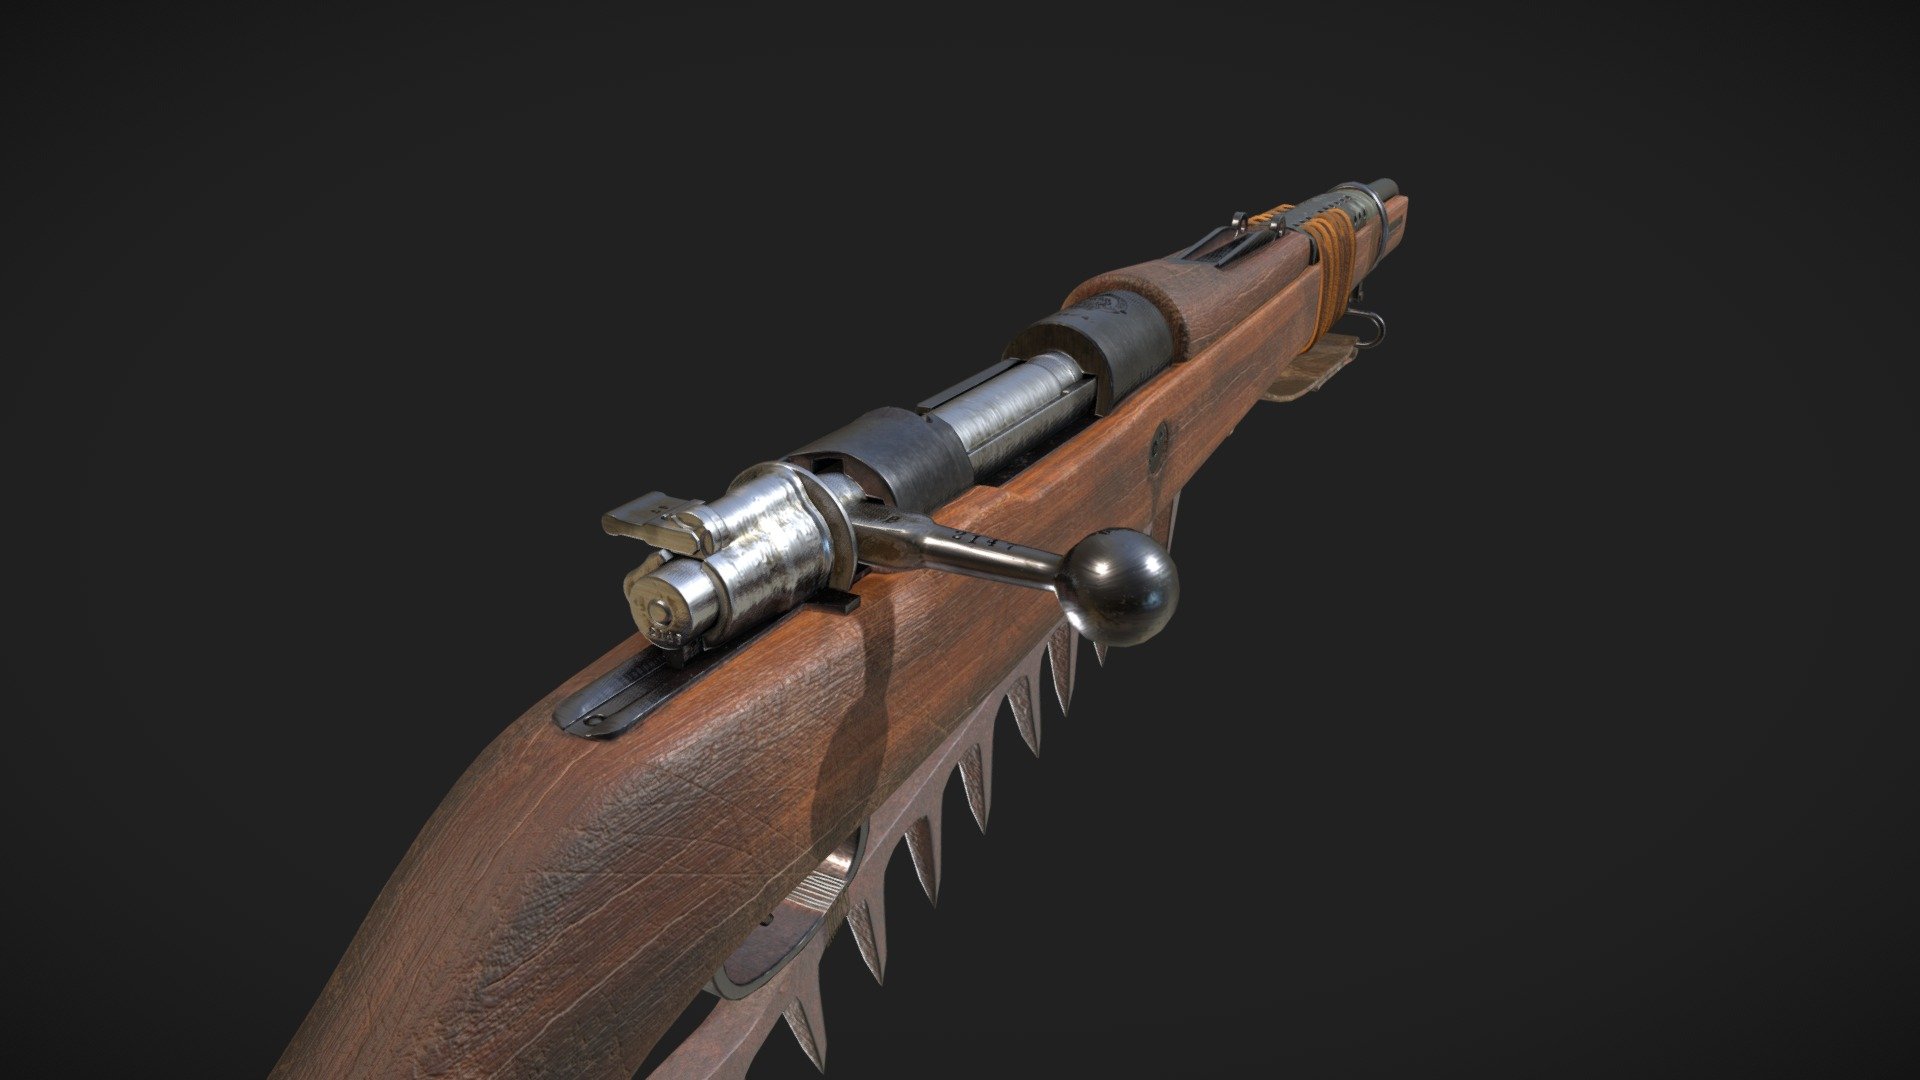 This week I finished working on texturing and did the final touch ups in substance painter to ensure I am getting the look i want from my rifle. I wanted to give it a worn but still useable look with the wear that was put on this model. 3d model